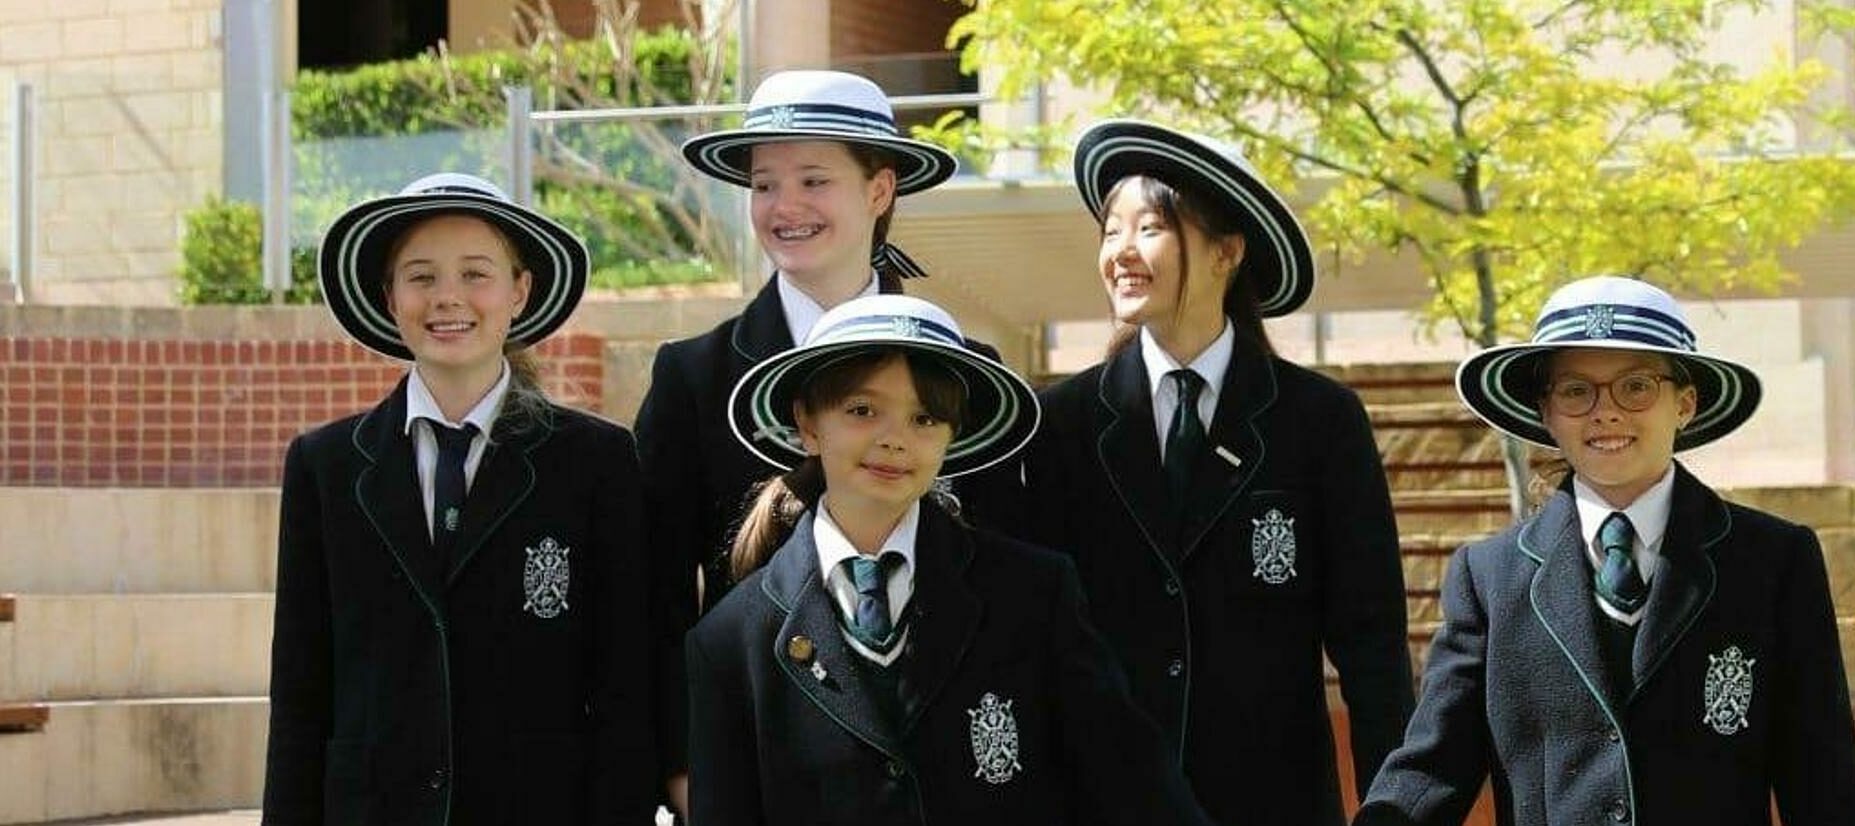 5 female students of various ages wearing Presbyterian Ladies College uniforms in a courtyard